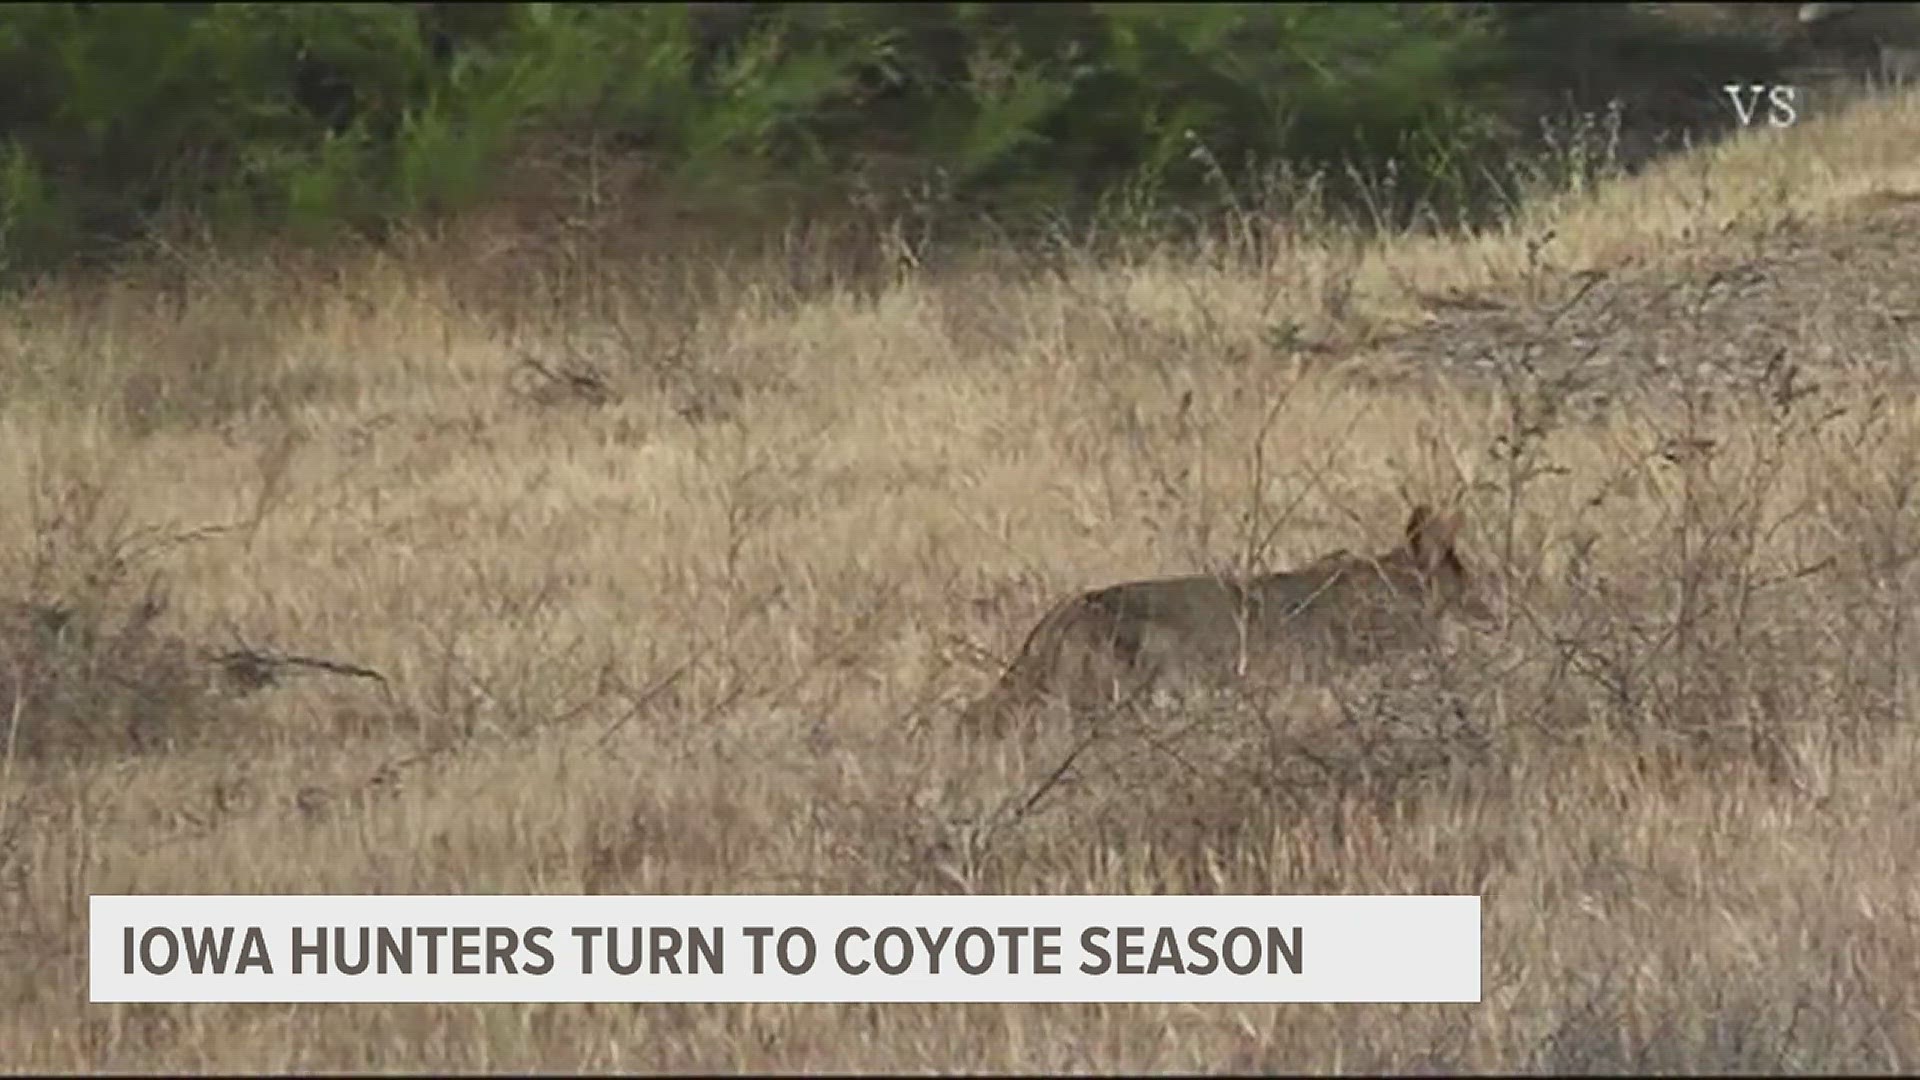 While most of Iowa's hunting seasons are now closed, some hunters are turning to coyotes. And the controversial practice of night hunting is legal.